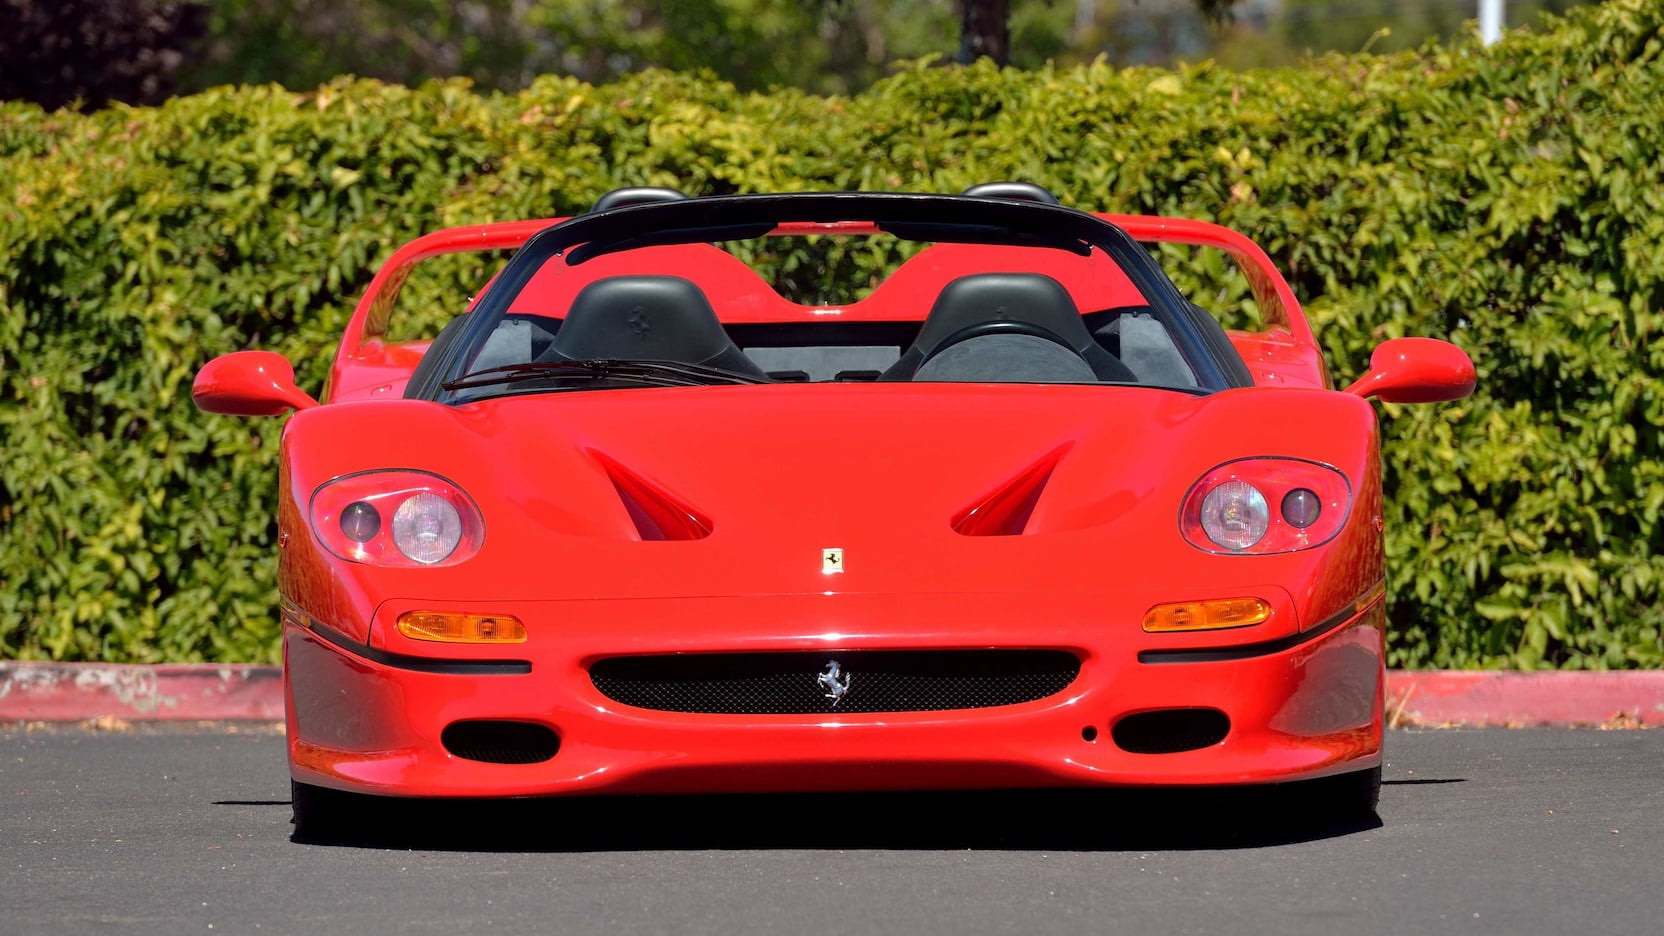 Front view of red Ferrari F50